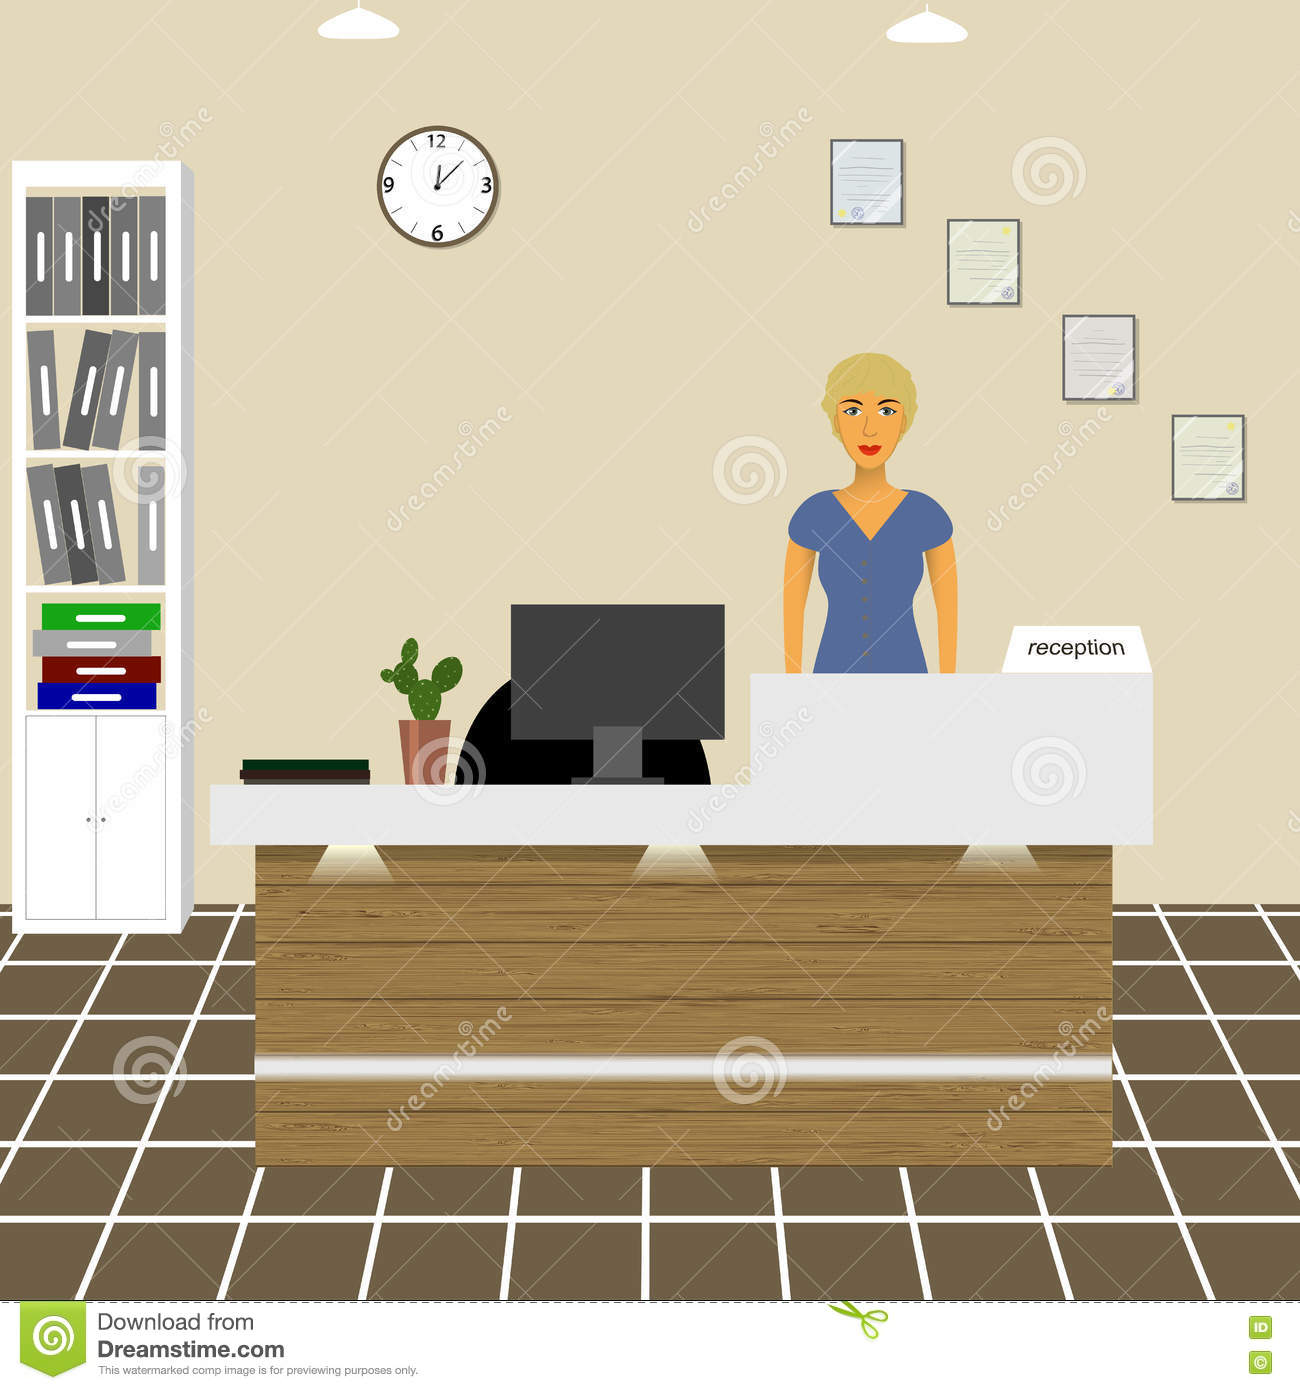 receptionist clipart hospital